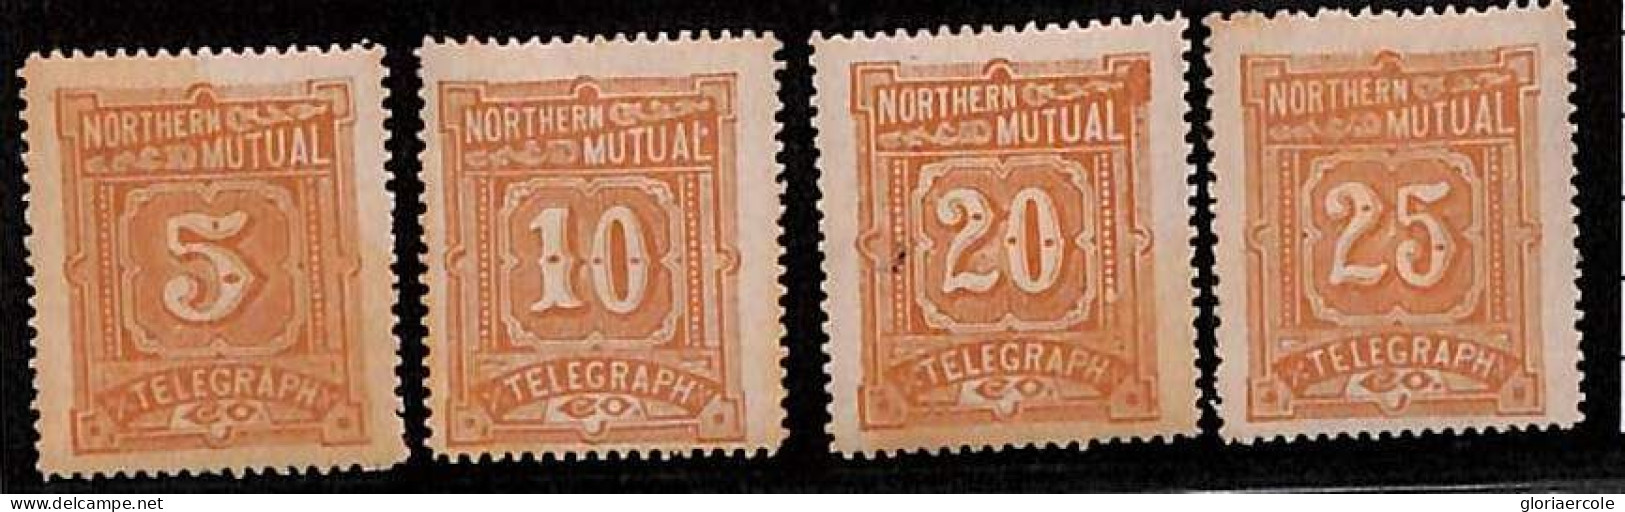 76577 - United States - STAMPS - Scott #  TELEGRAPH  11T 1/4  Mint Hinged M H - Telegraph Stamps